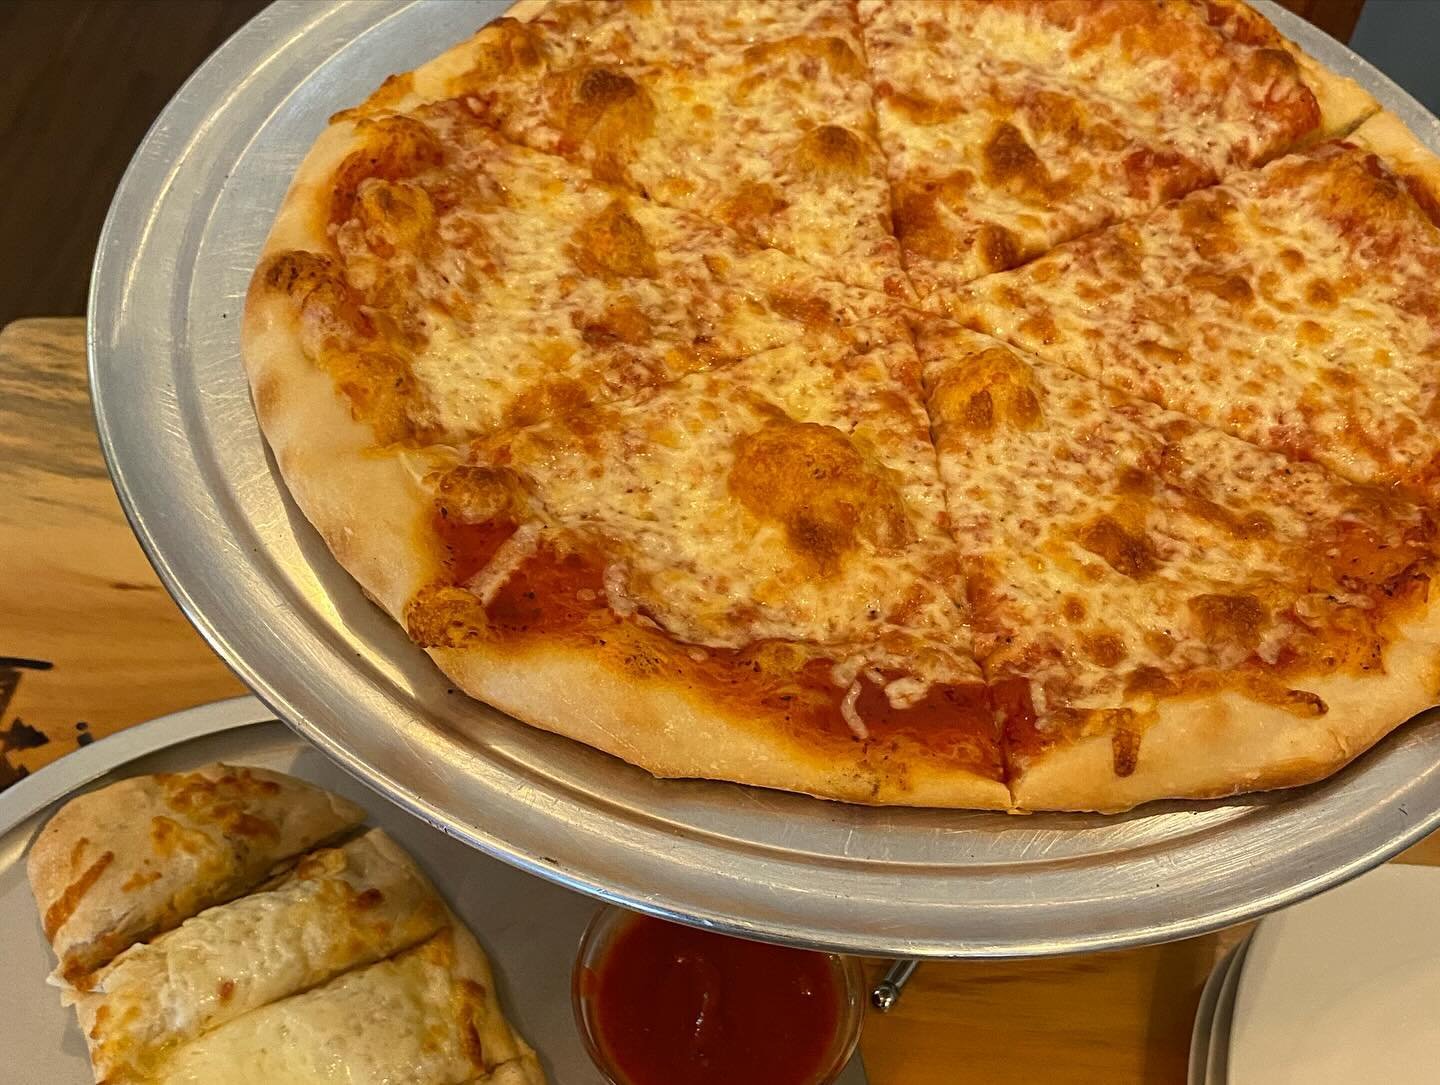 Have you been to @bigtimescatering? Friday night seems like a good time to start! Stop by to say hi to Jen and Tim, and don&rsquo;t leave without trying the cheesy bread. It&rsquo;s out of this world! ✈️🌎

📍247 Campbell Street, Williamsport